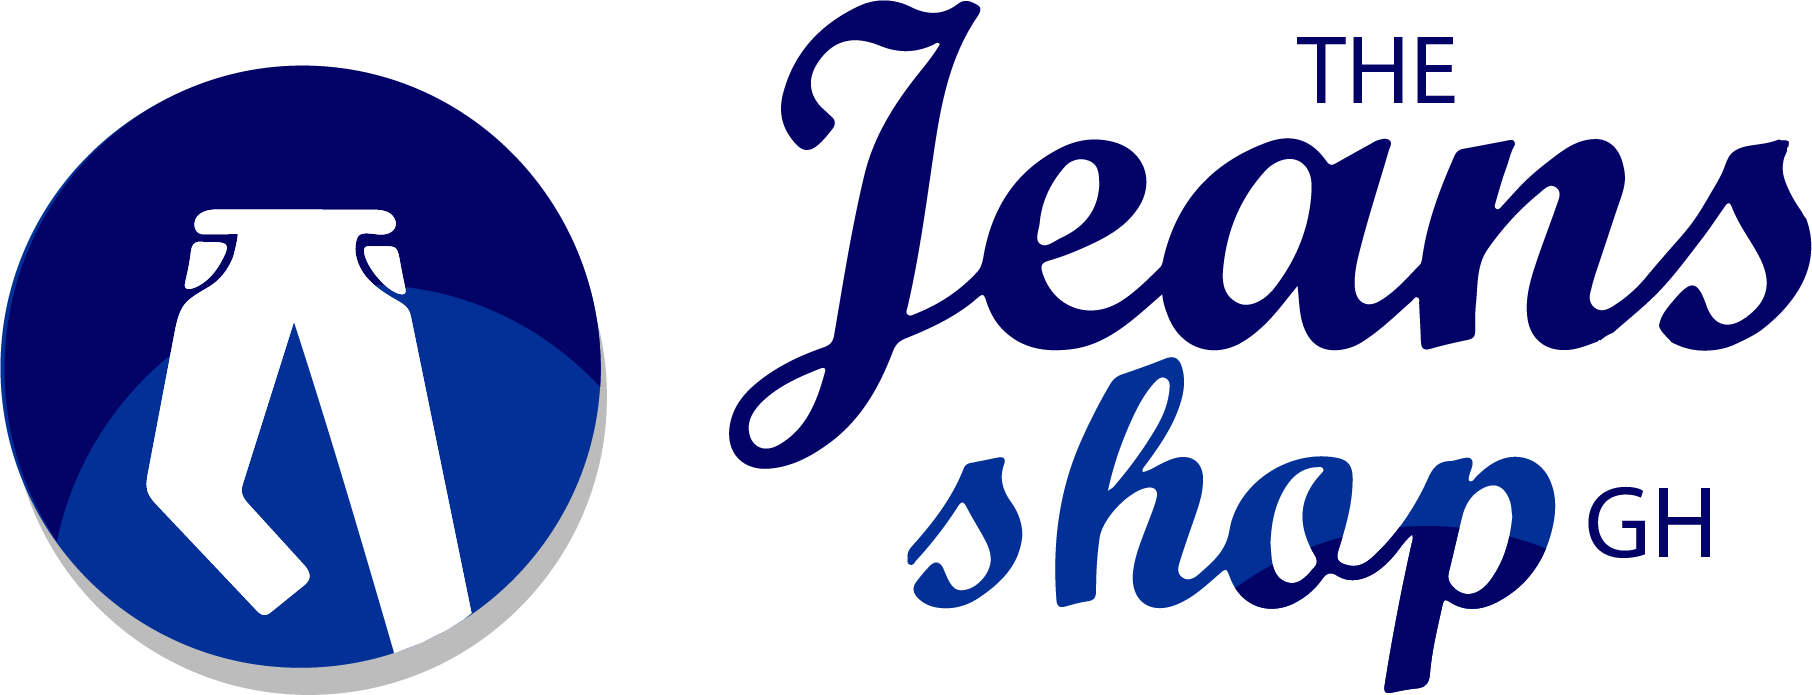 The Jeans Shop Gh - Shop Quality and Affordable Jeans